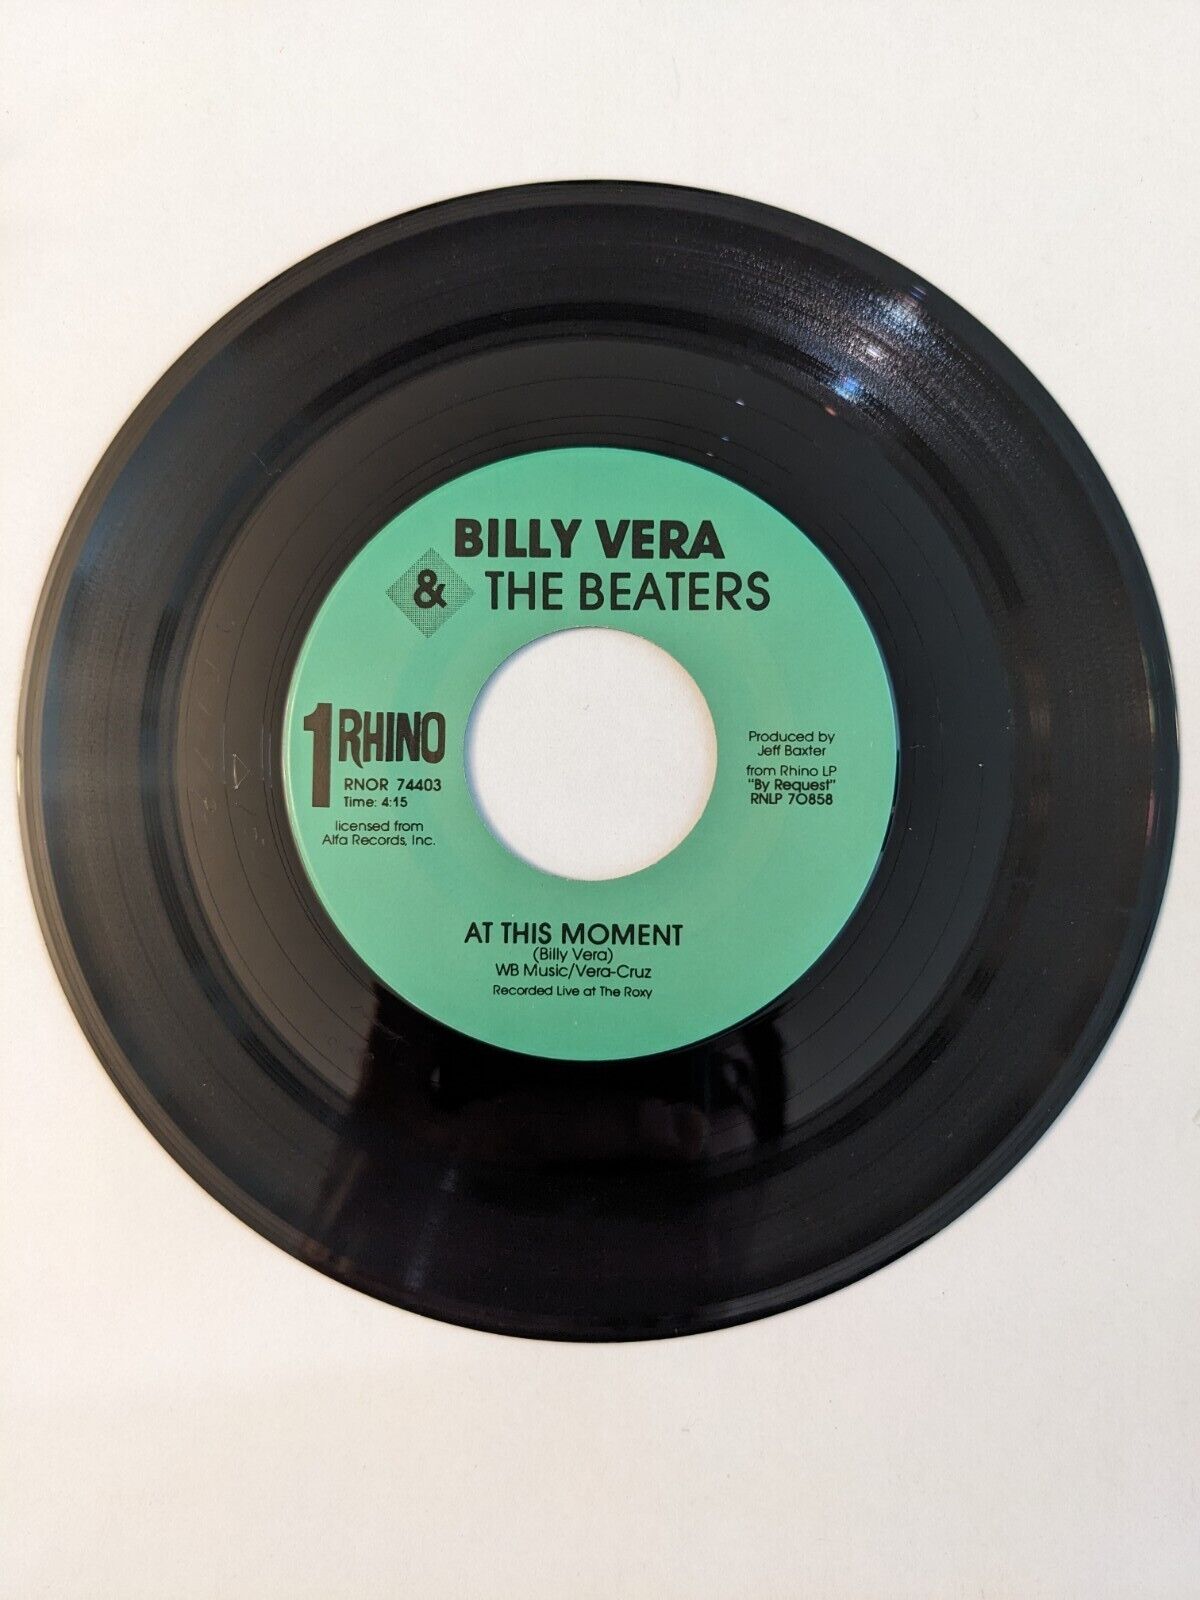 Vintage Billy Vera & The Beaters Peanut Butter At This Moment 45 Record Vinyl EX